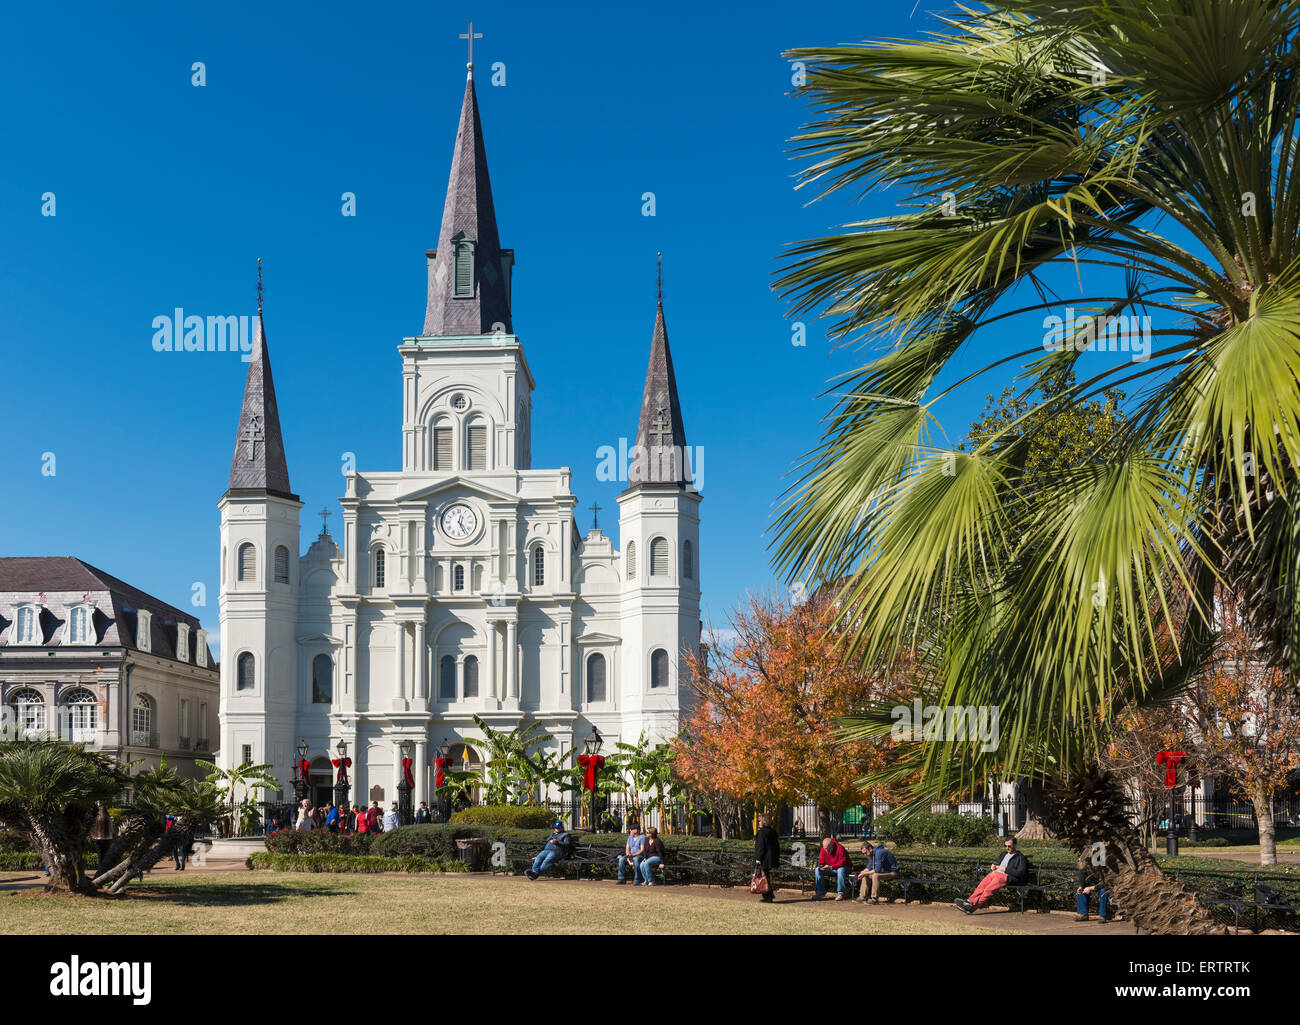 New Orleans French Quarter - St Louis Cathedral, Jackson Square, New Orleans, Louisiana, USA Stock Photo